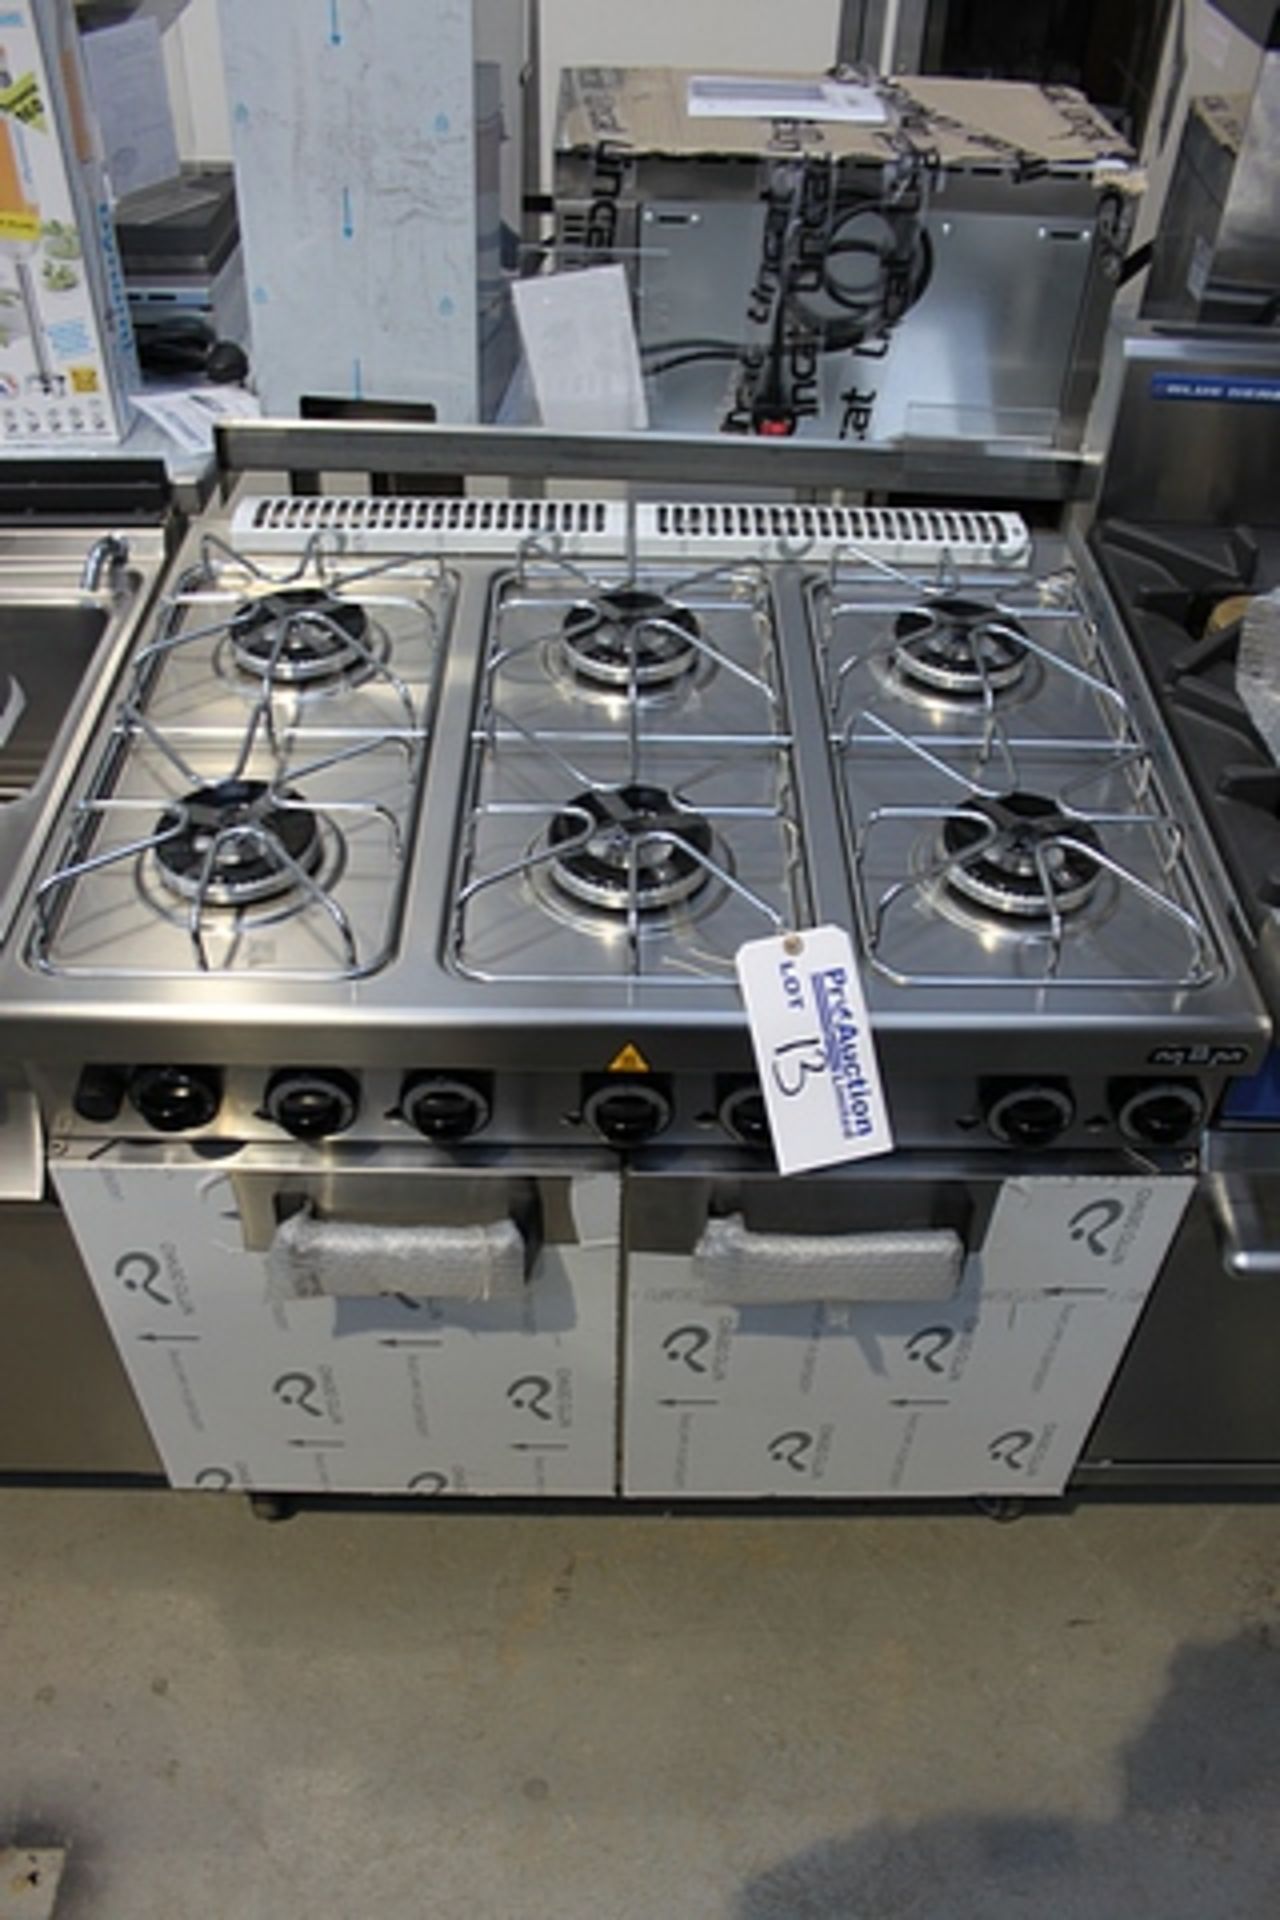 MBM G6SF972P 6 burner brand new The watertight pressed, 45mm deep, worktop is in 1.5 mm AISI 304